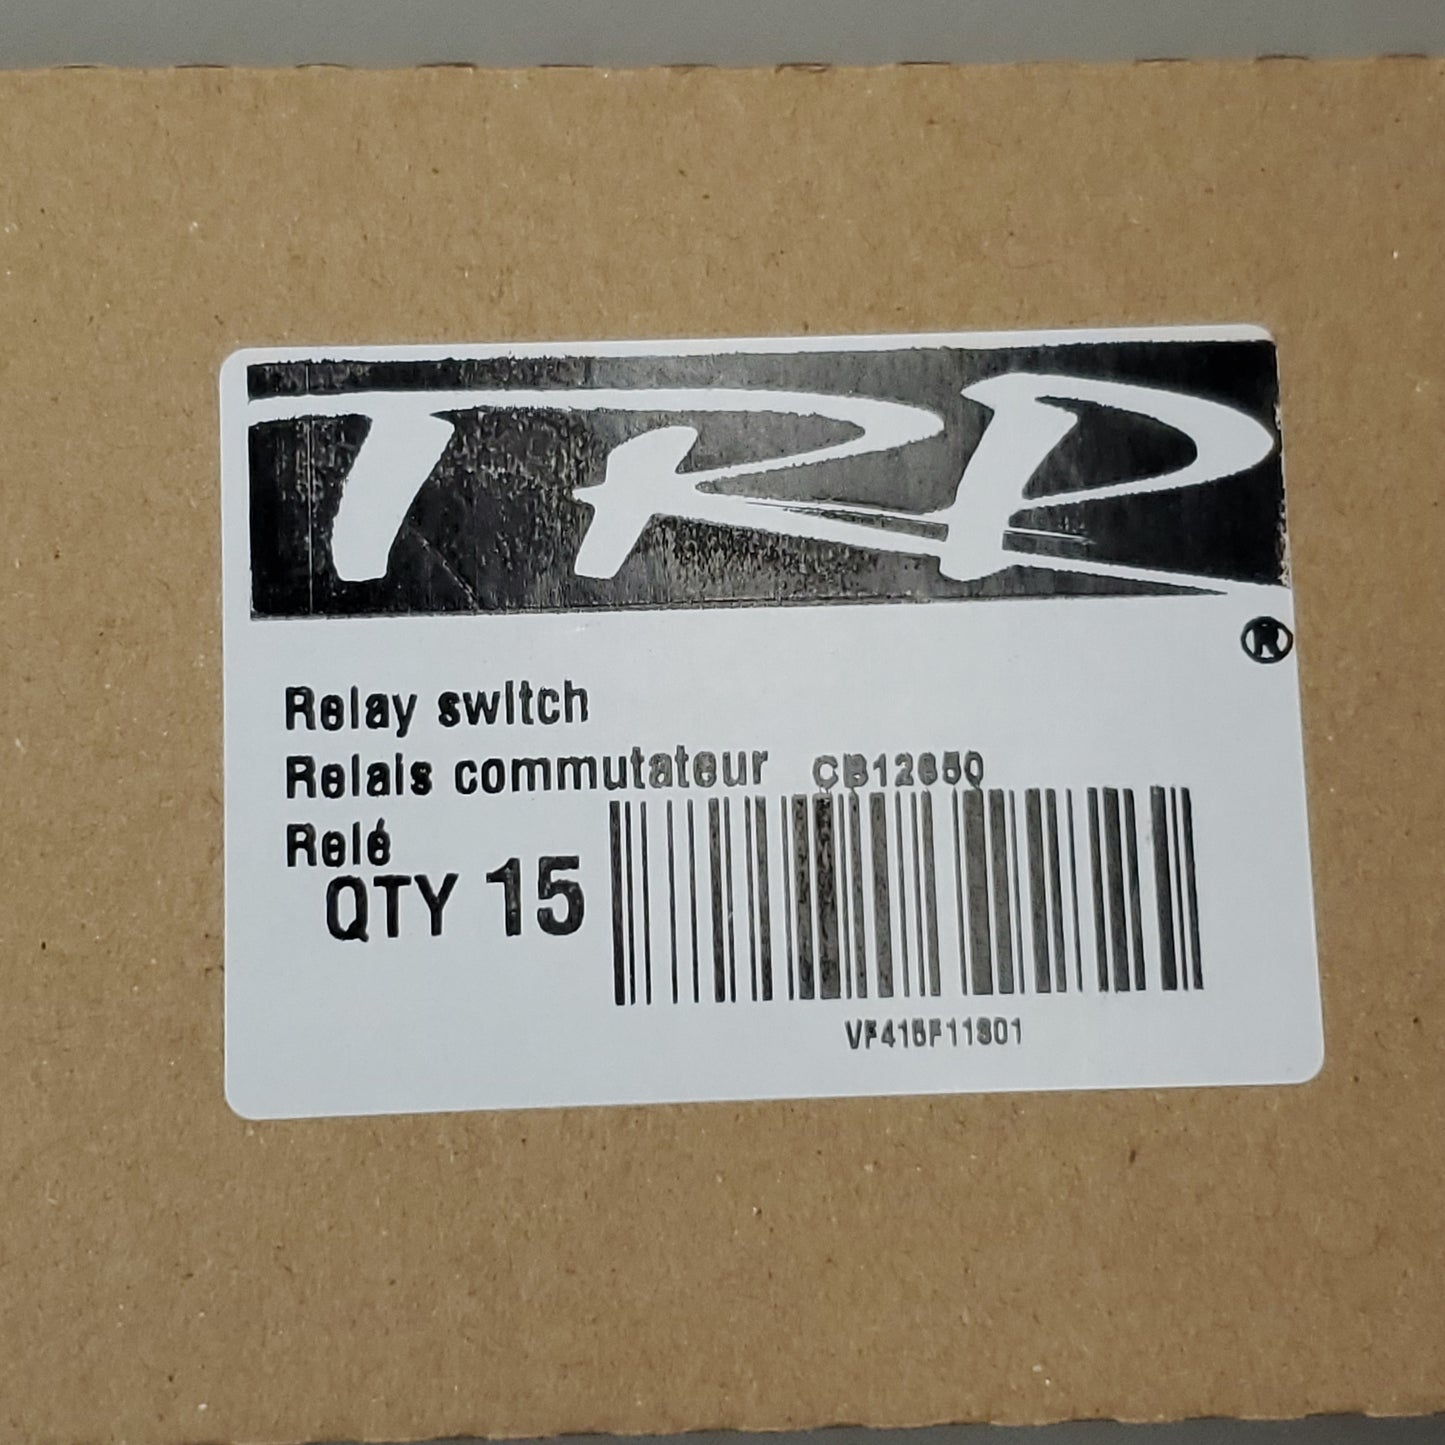 TE connectivity 15 Pack of TRP 12V Relay Switches V23234-A0001-X032 CB12650 (New)